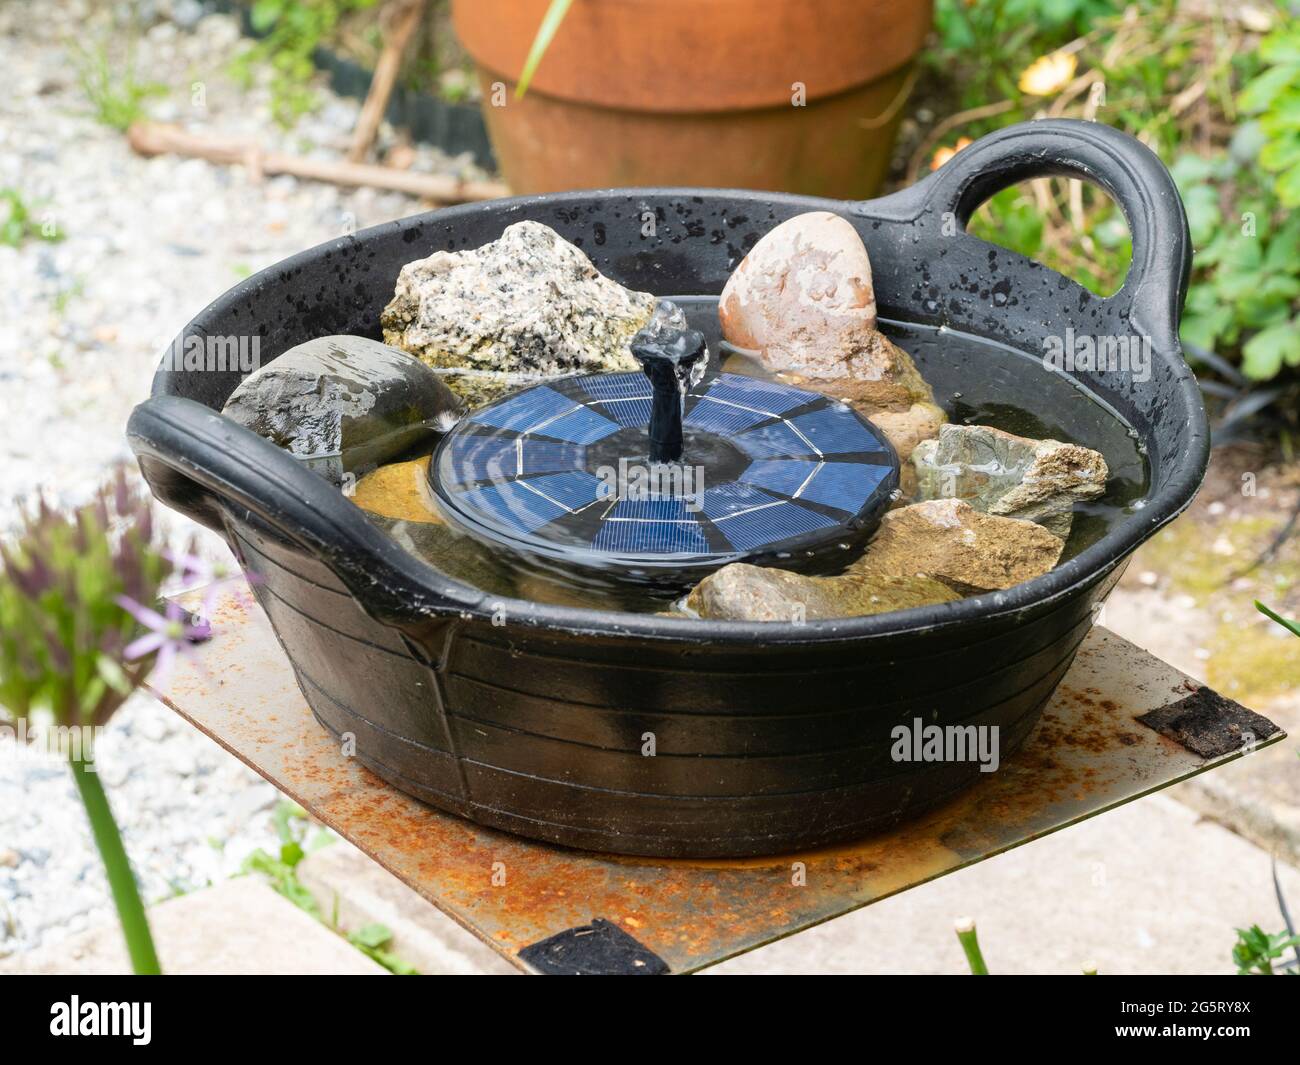 Small solar fountain in an improvised garden bird bath with cobbles to provide perches for drinking and bathing Stock Photo